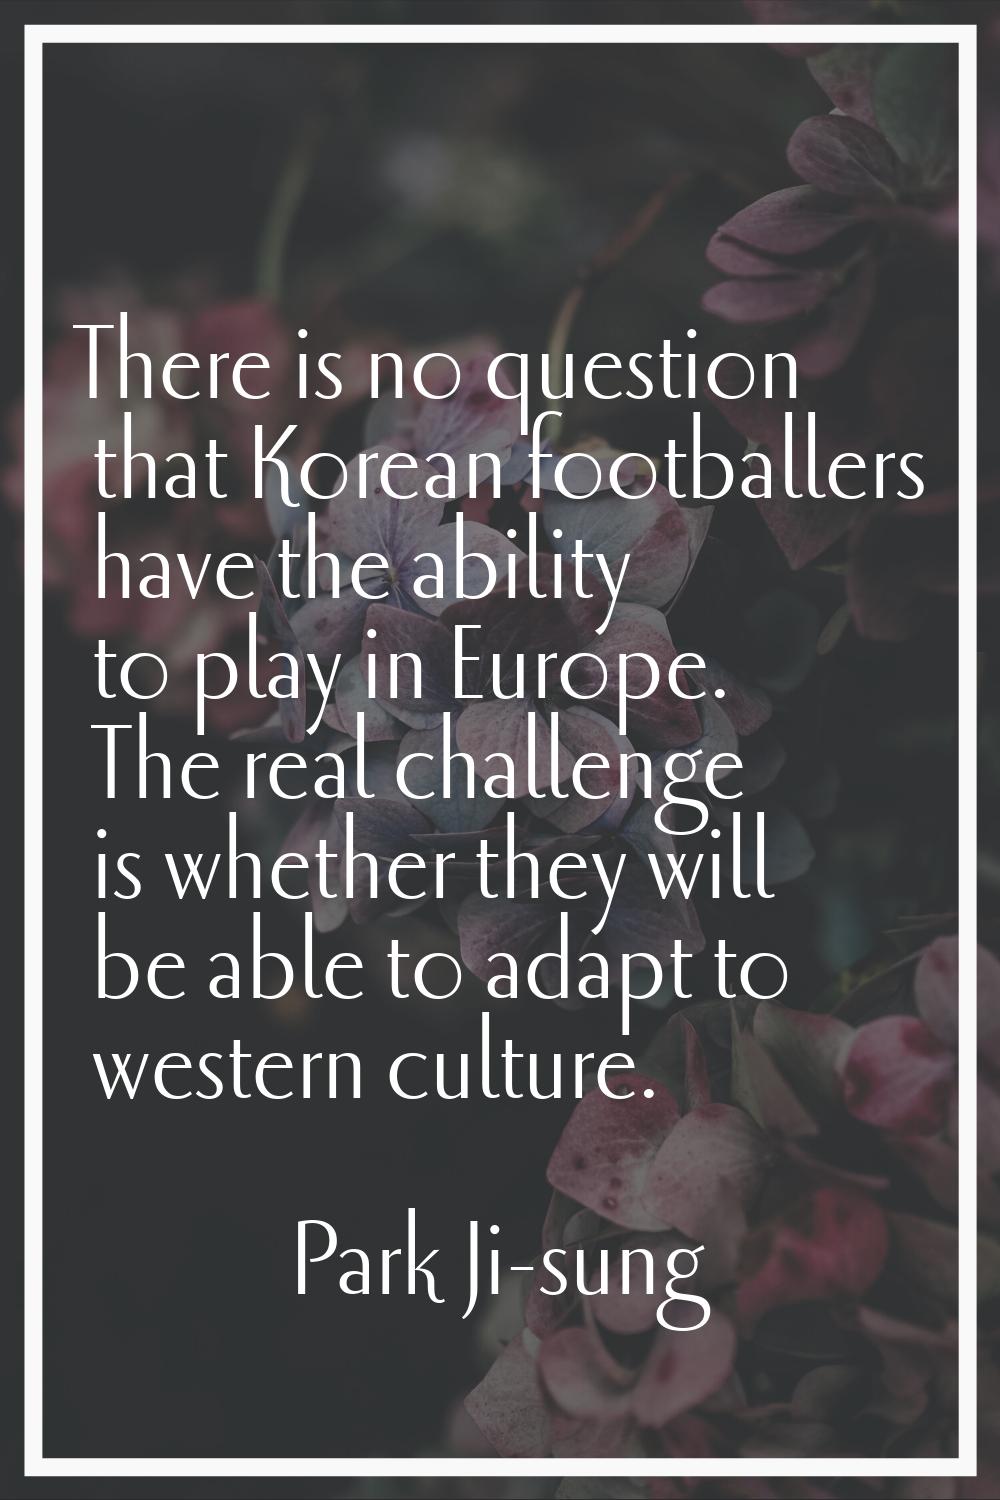 There is no question that Korean footballers have the ability to play in Europe. The real challenge